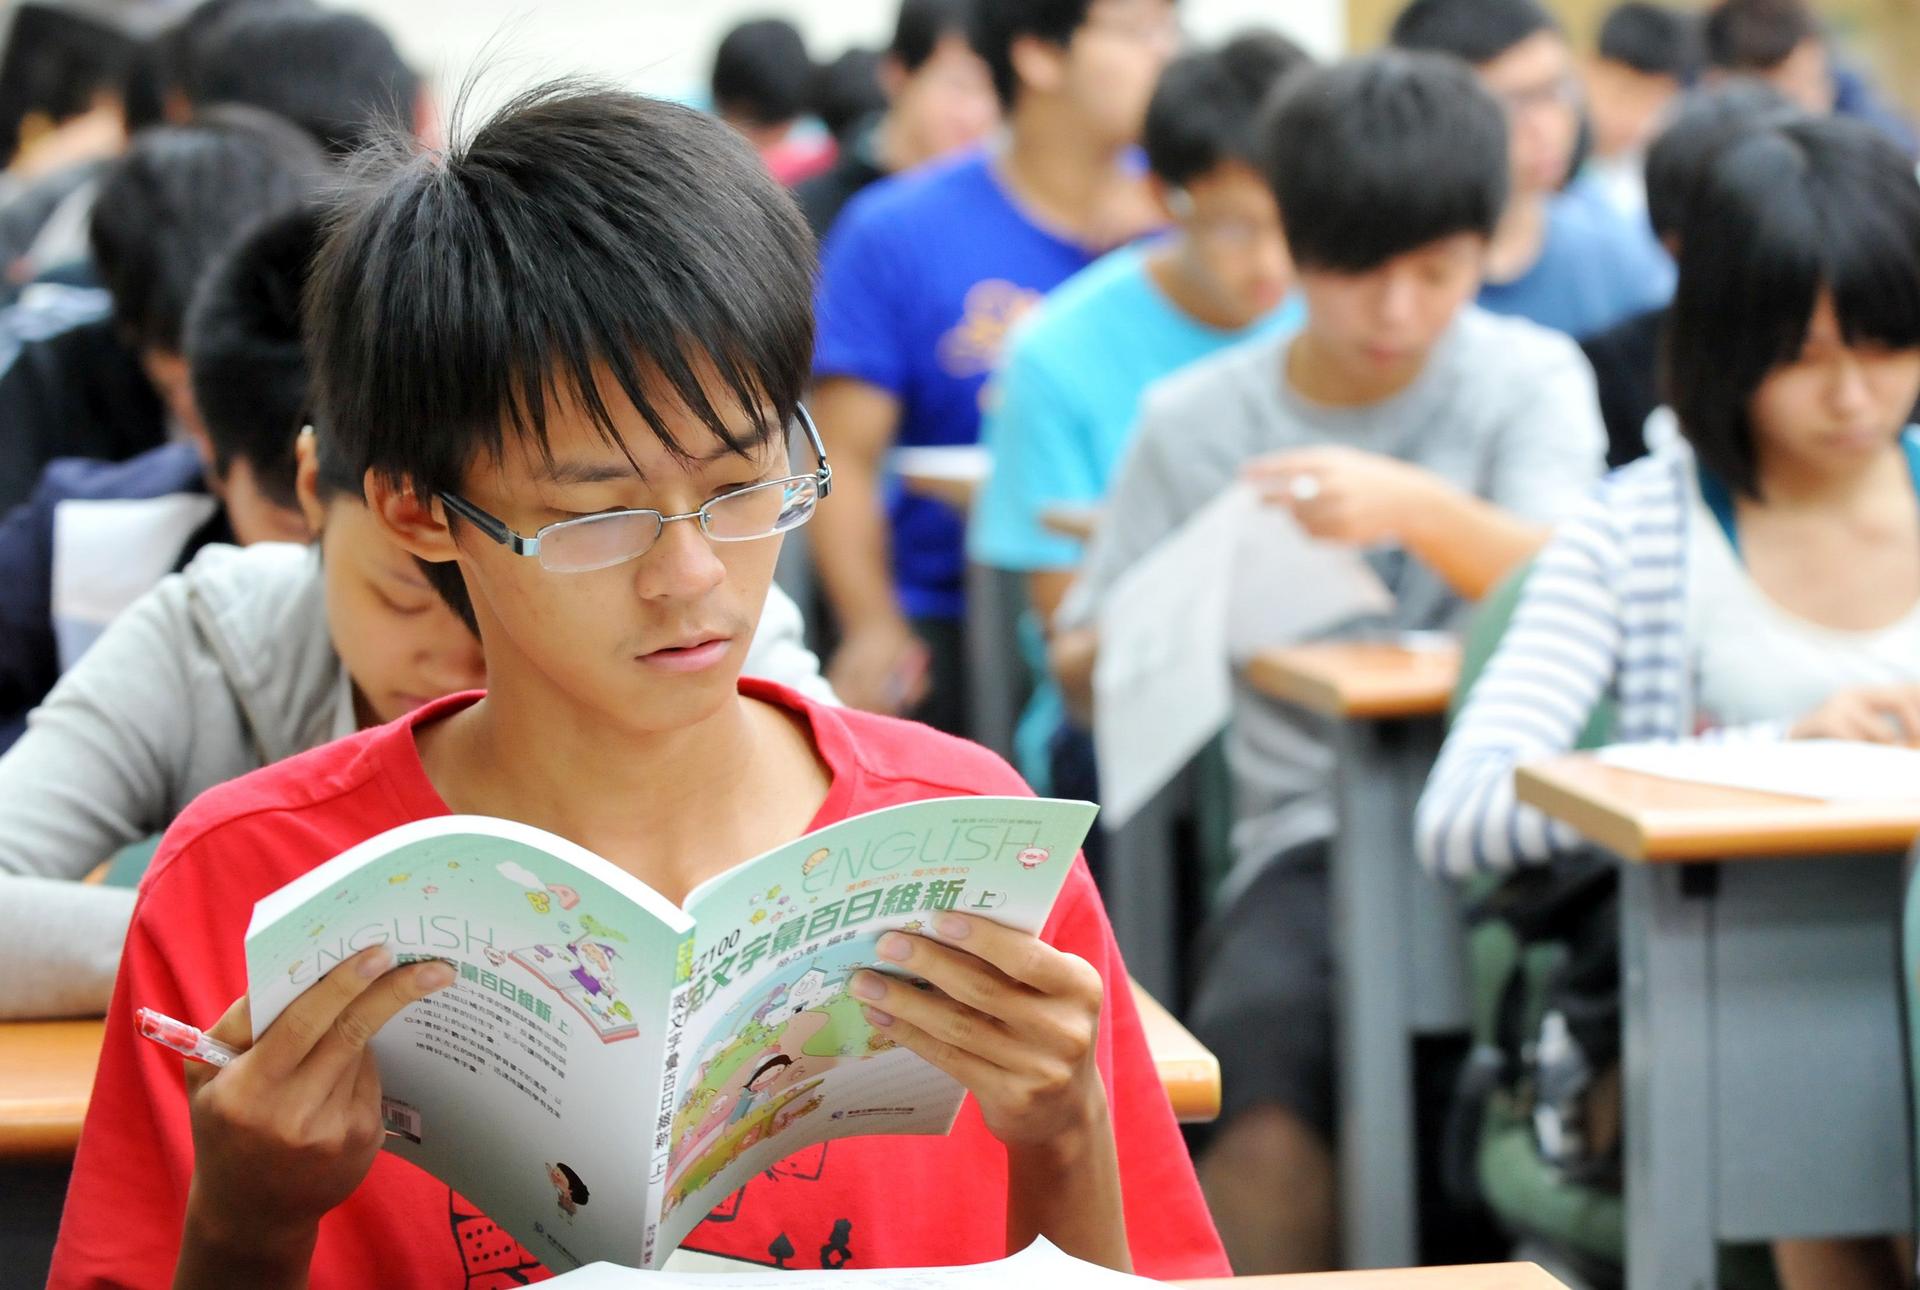 Students in Taipei performed well in the OECD's 2012 international student assessment. Photo: AFP